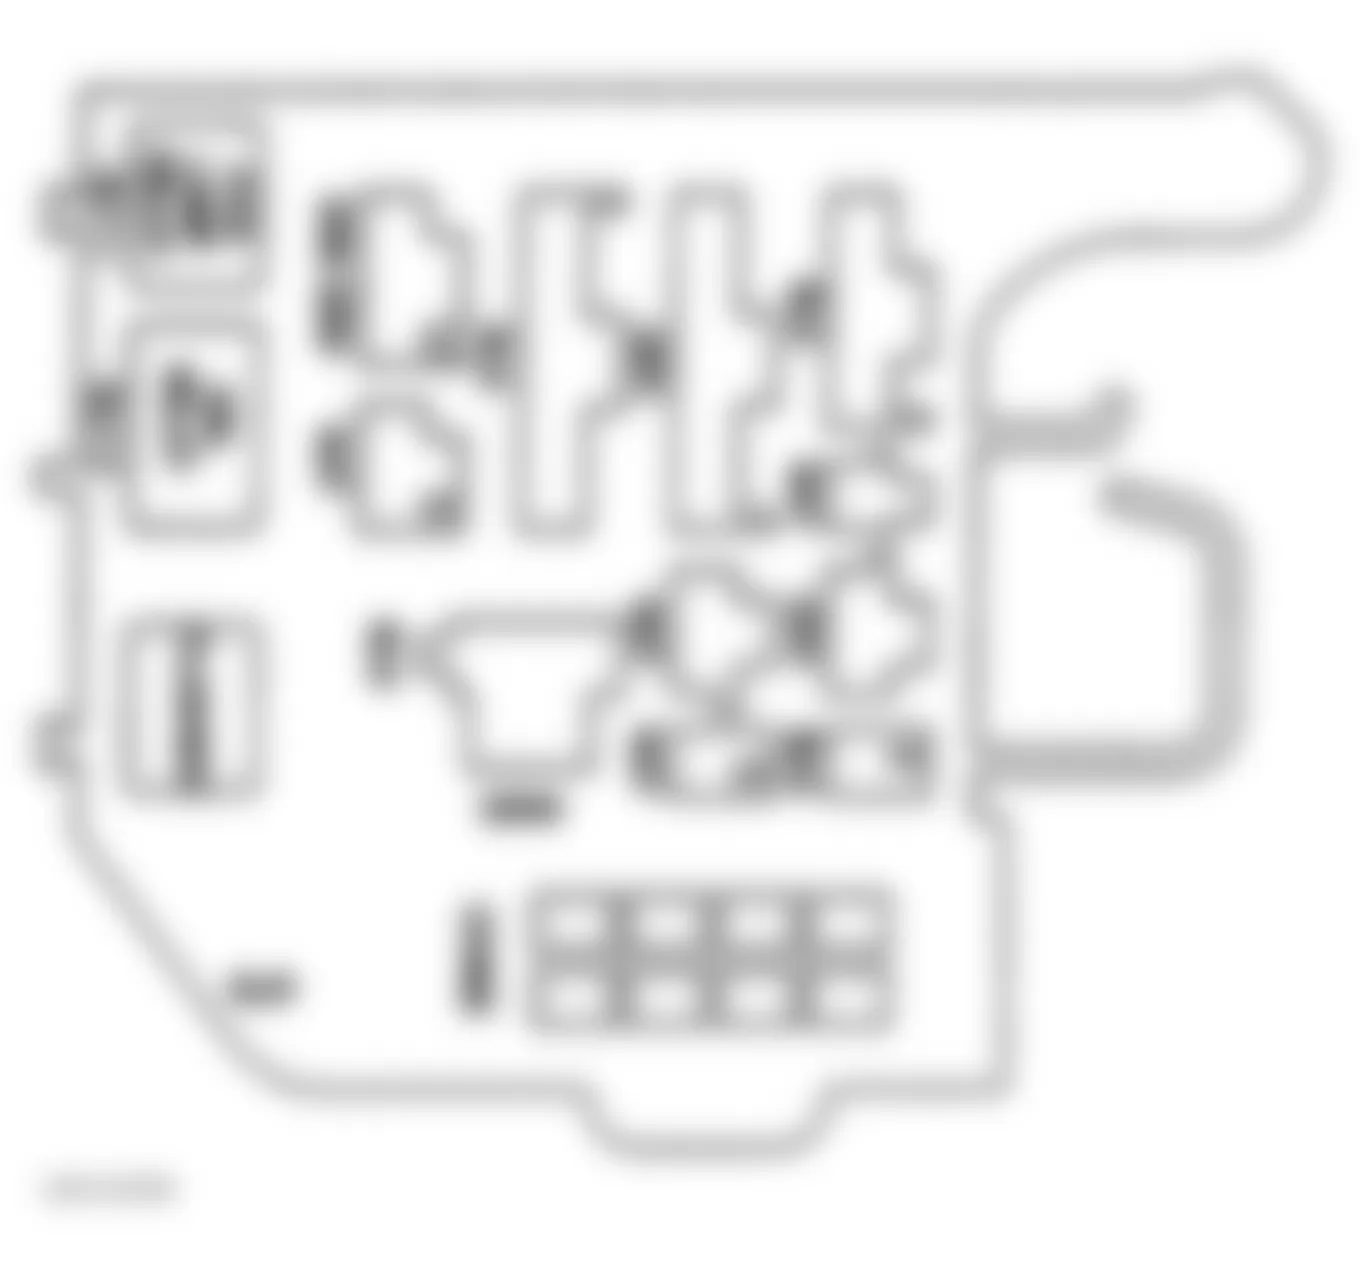 GMC Pickup K2500 1997 - Component Locations -  Identifying Convenience Center Components